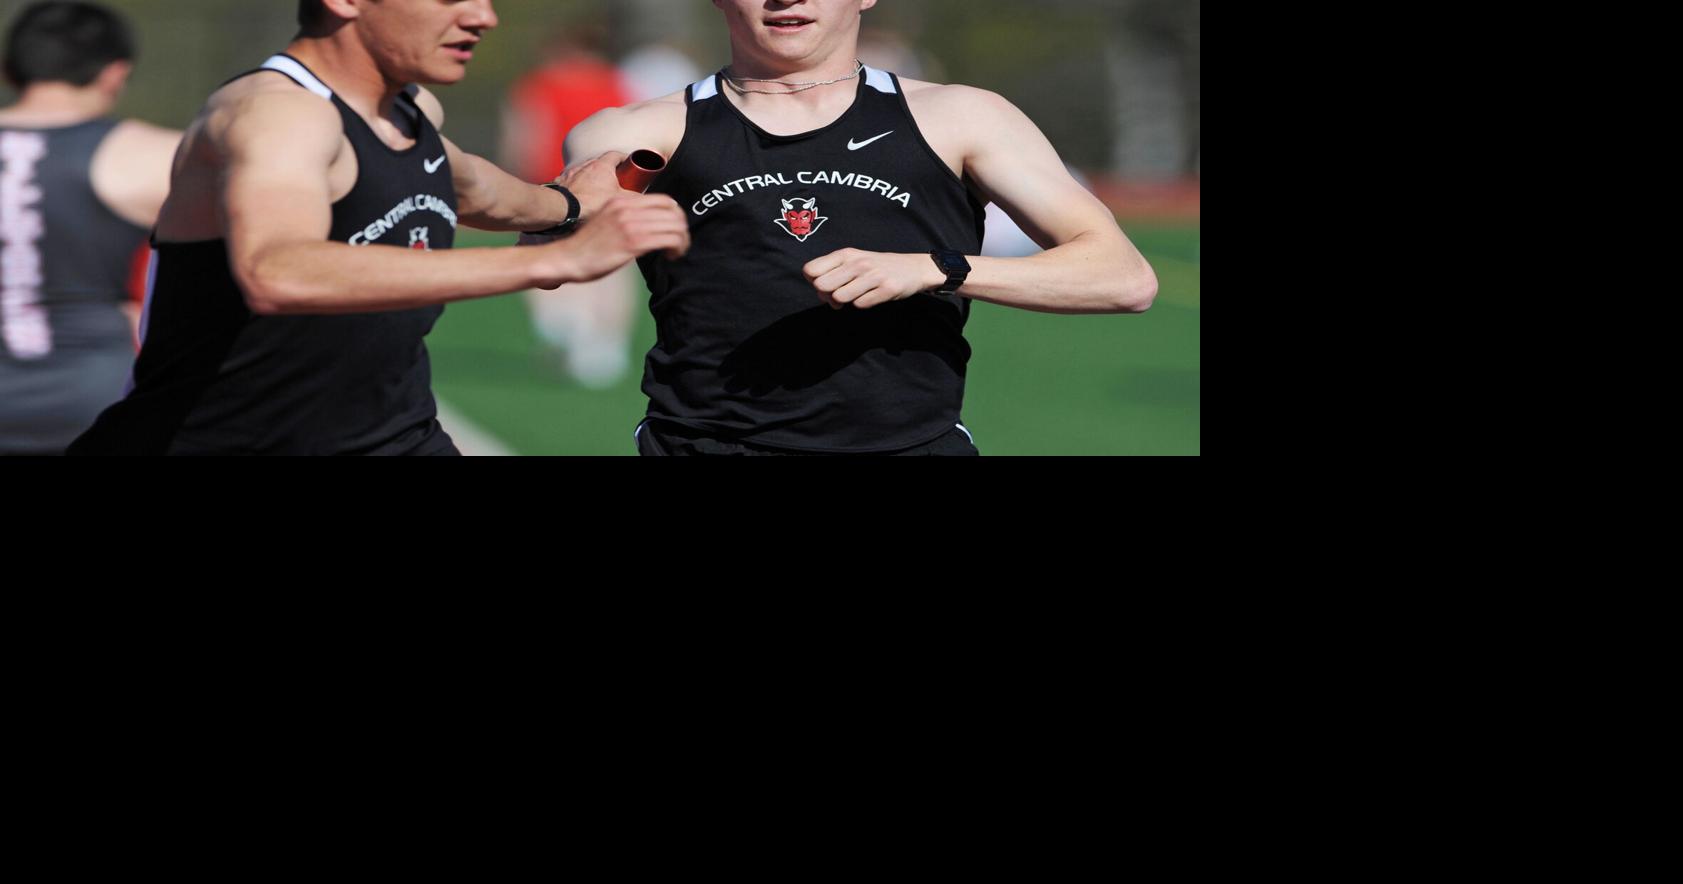 PHOTO GALLERY Central Cambria sweeps LHAC track and field meet at